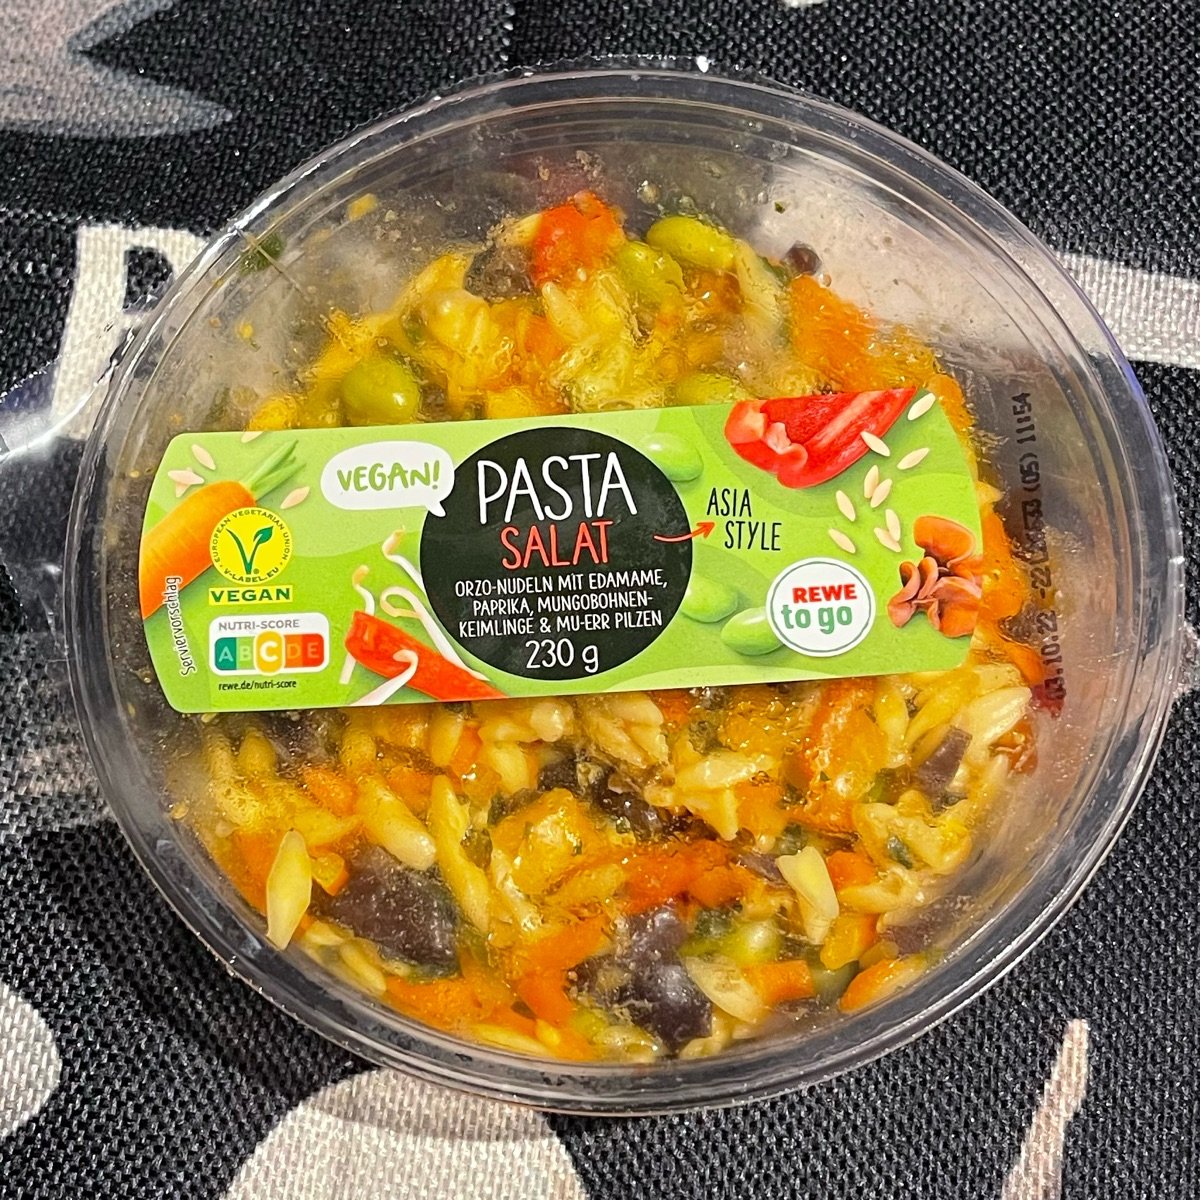 Rewe To Go Pastasalat Asia-Style Review | abillion | 